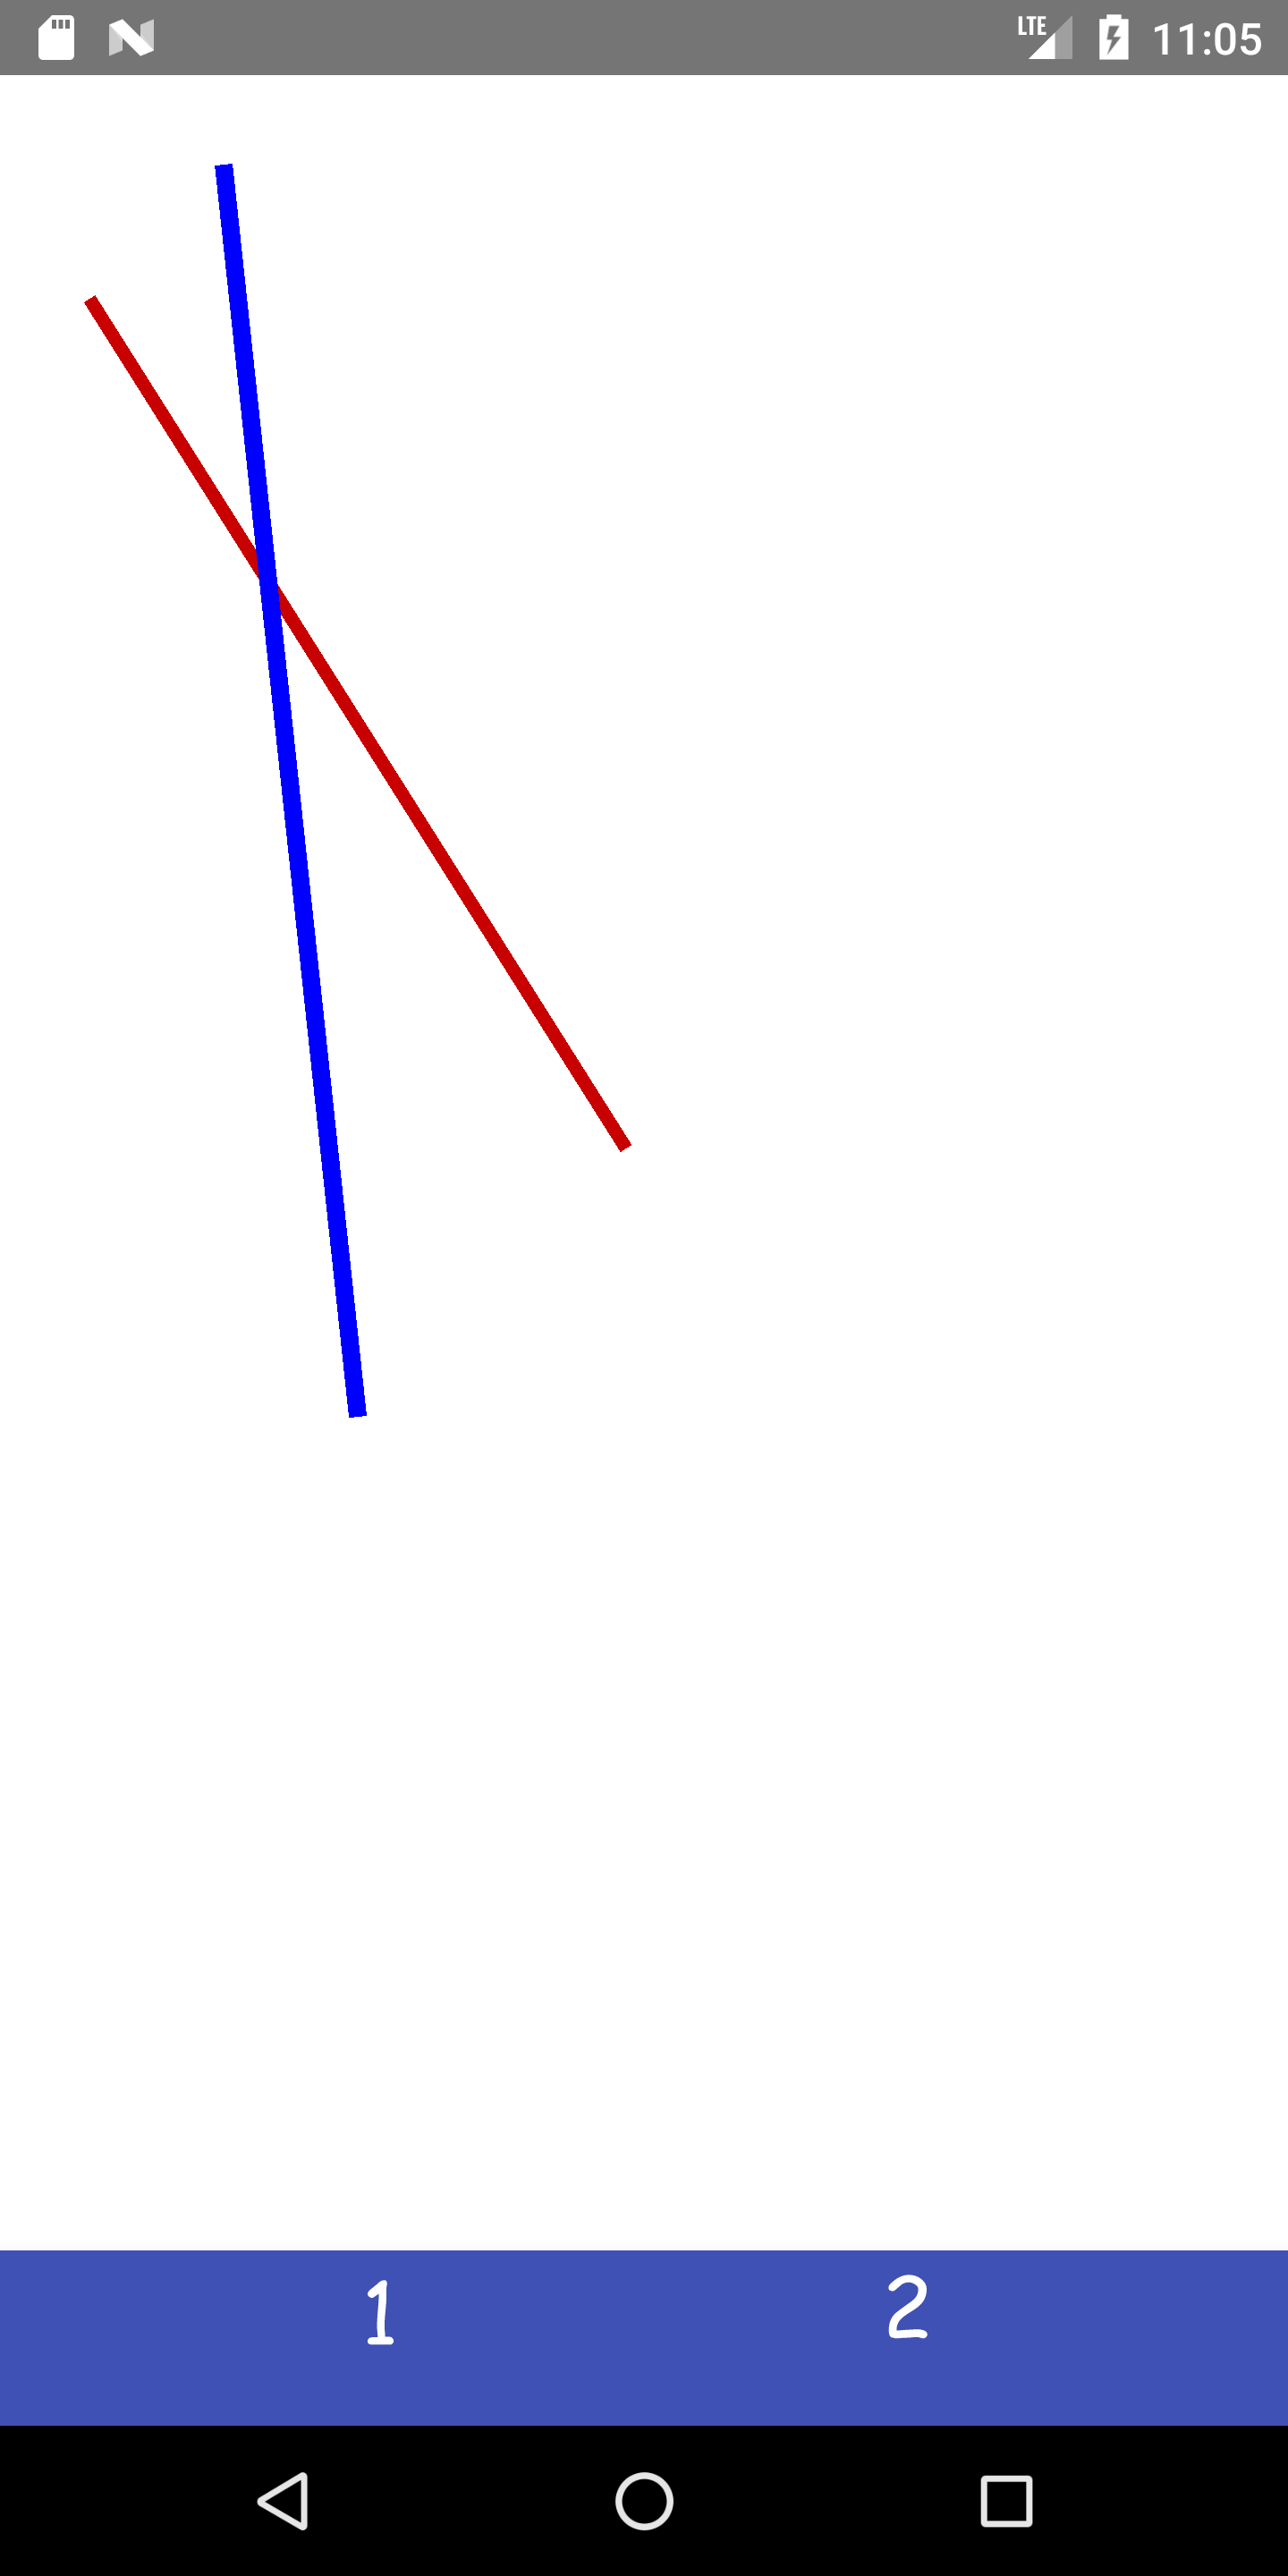 A red line starts from top left to the center of the screenshot. A blue line also is present